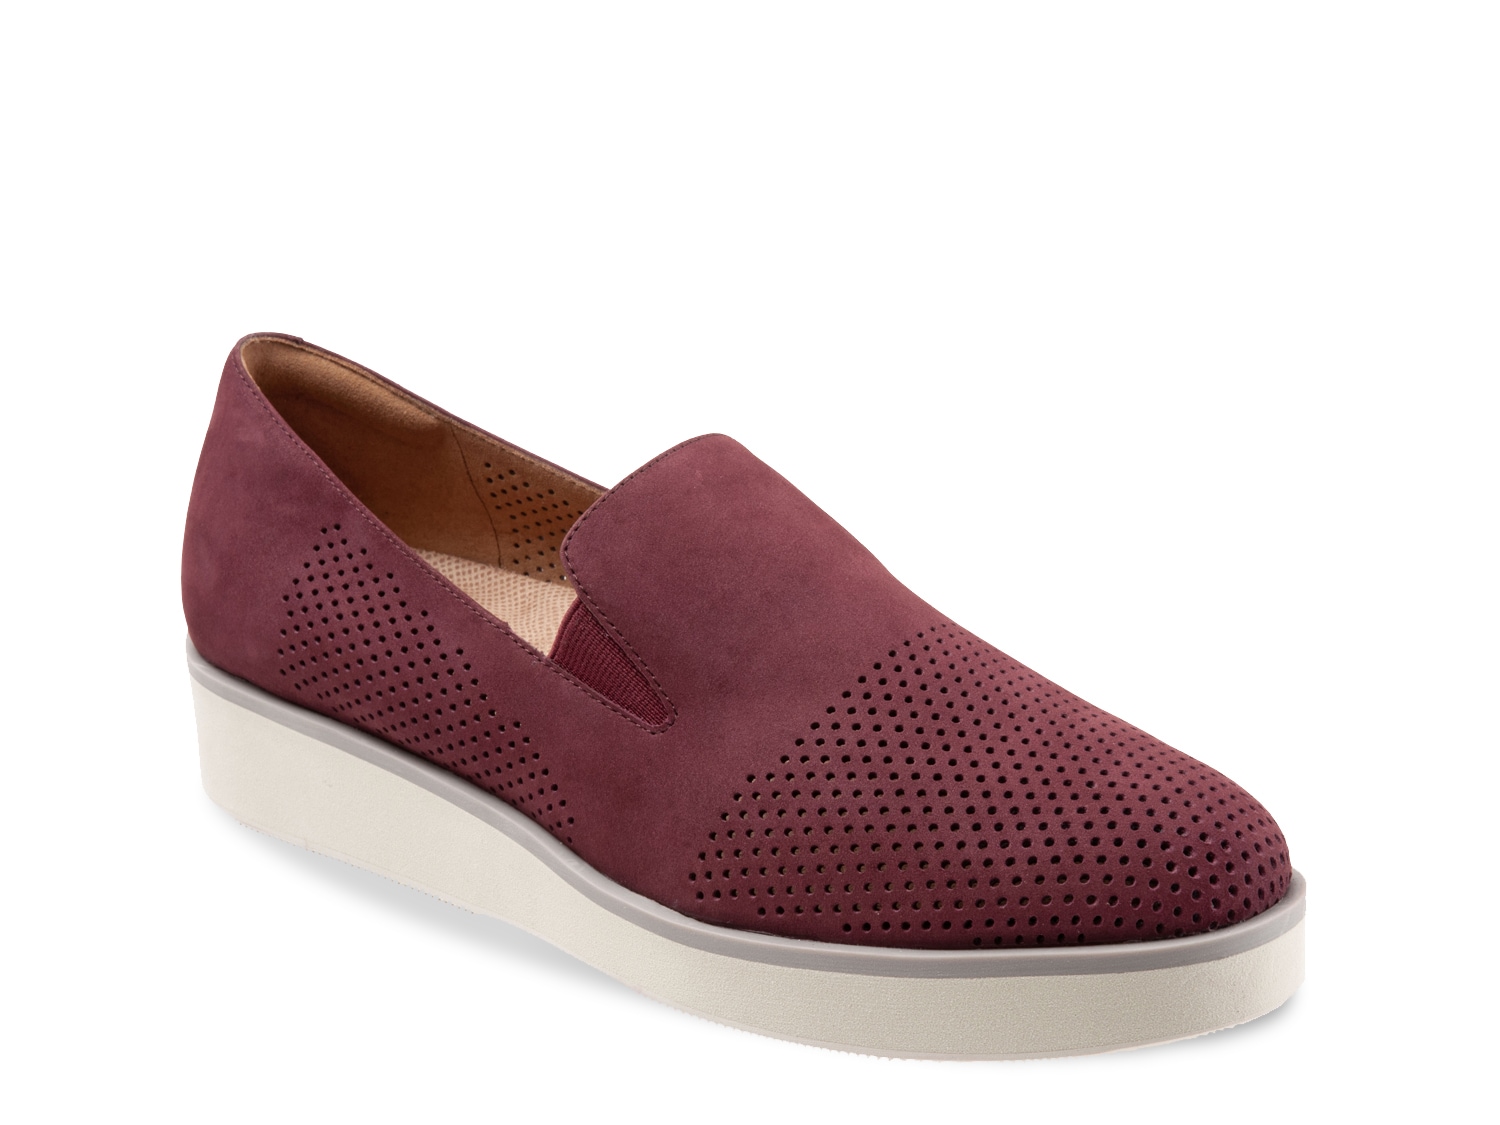 Whistle Wedge Loafer Free Shipping | DSW